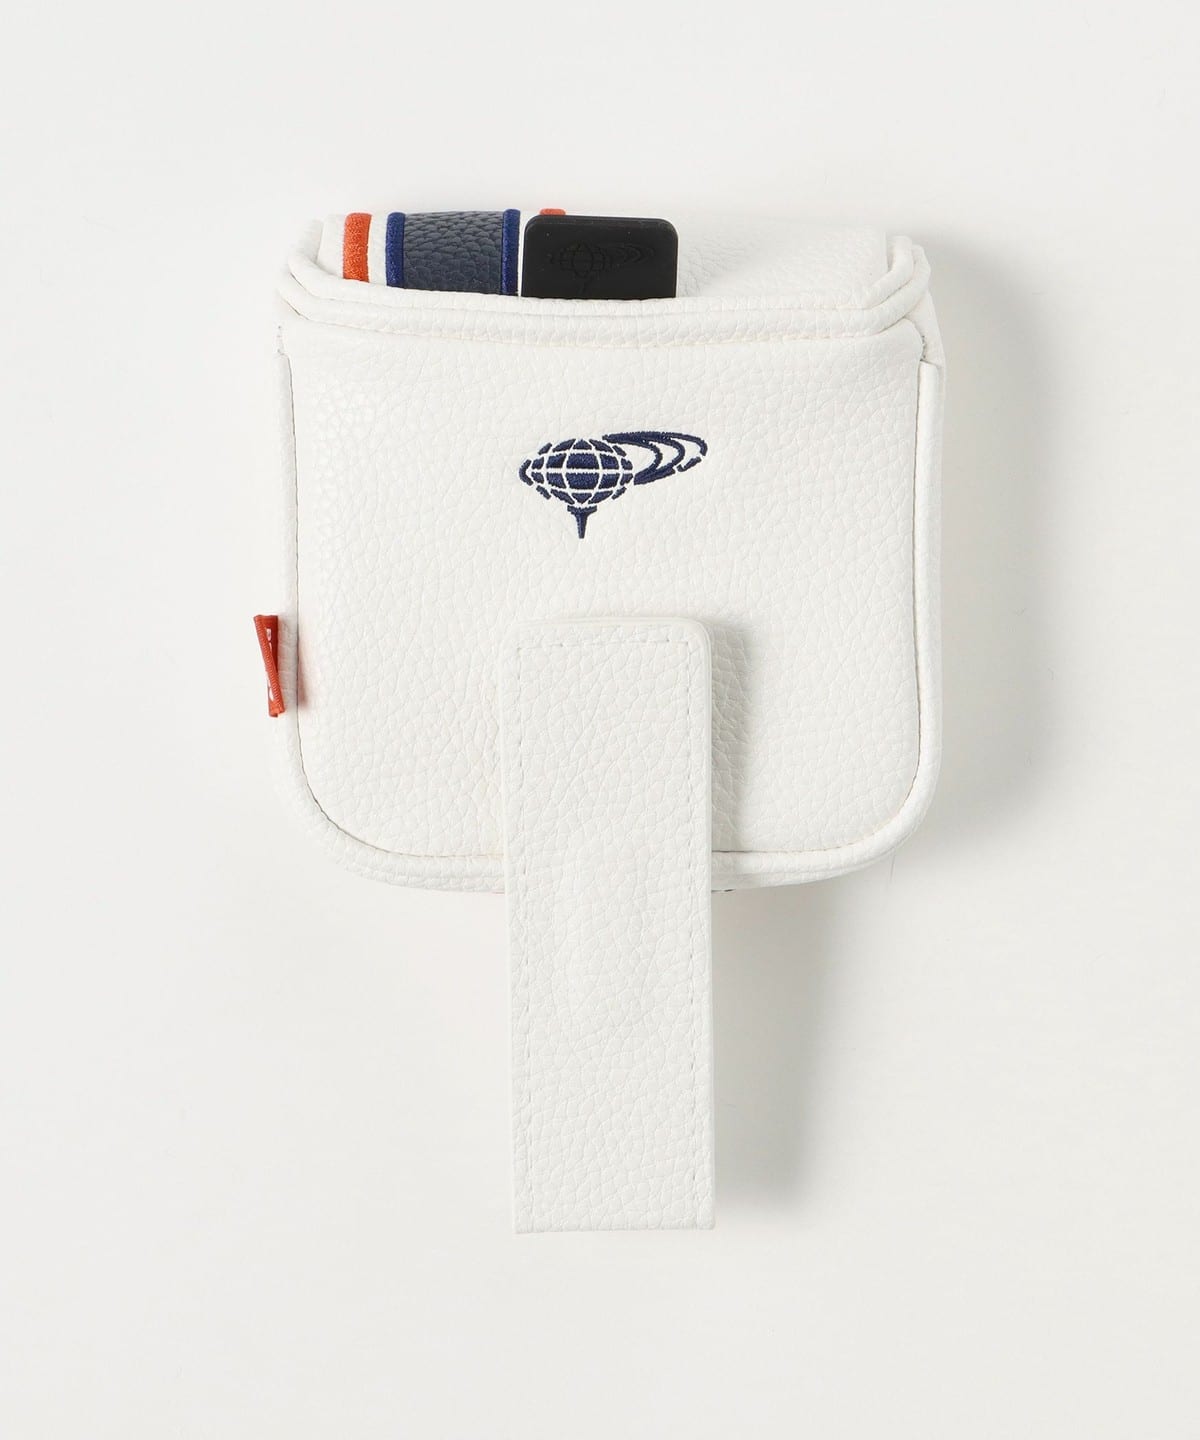 BEAMS GOLF BEAMS GOLF BEAMS GOLF / Tour Pro Putter Cover (Mallet 